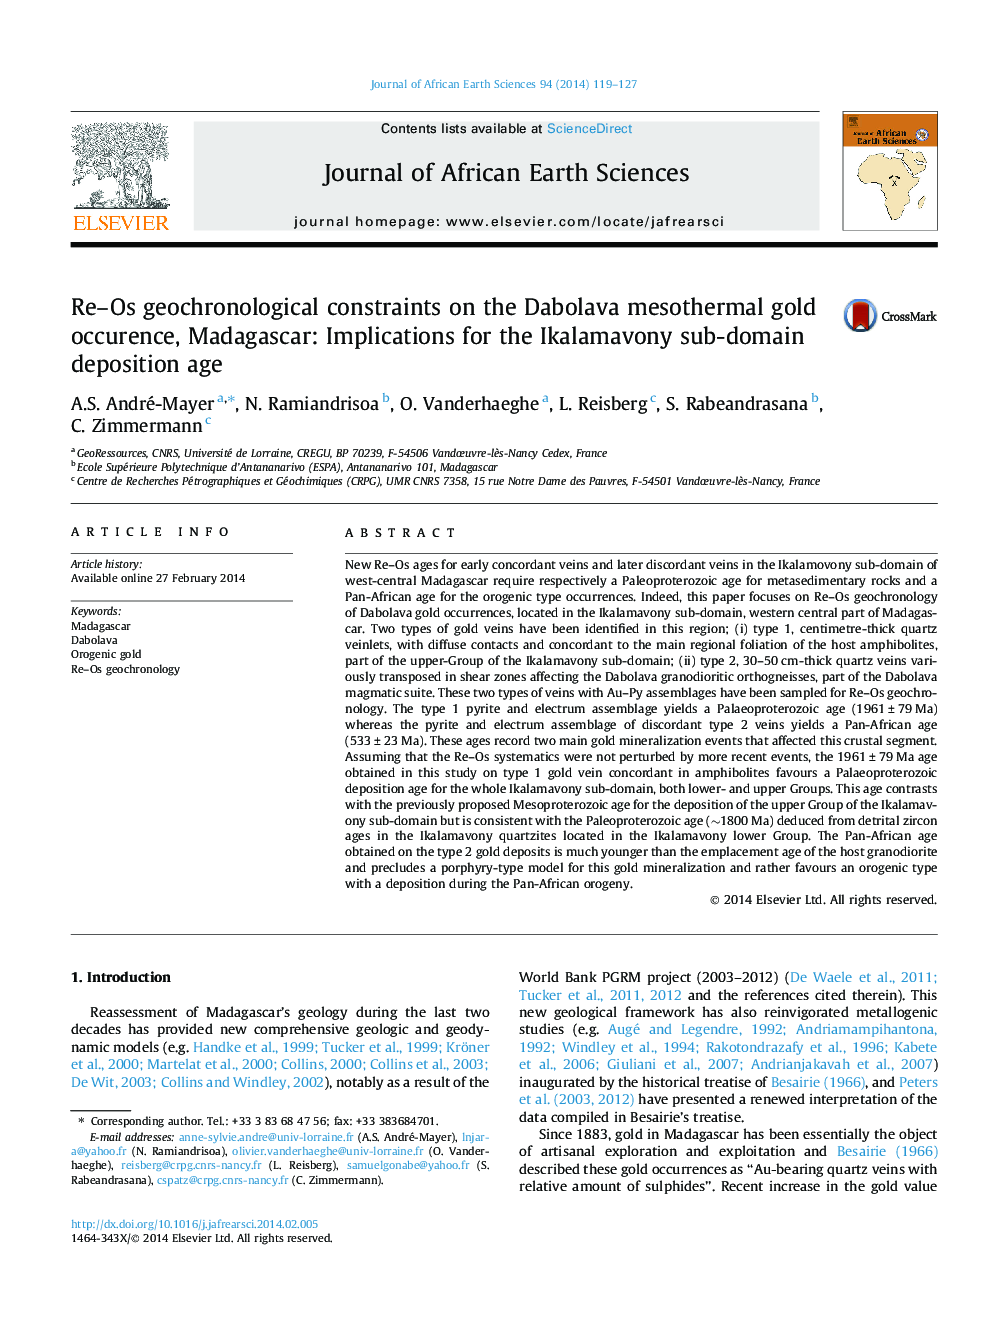 Re–Os geochronological constraints on the Dabolava mesothermal gold occurence, Madagascar: Implications for the Ikalamavony sub-domain deposition age